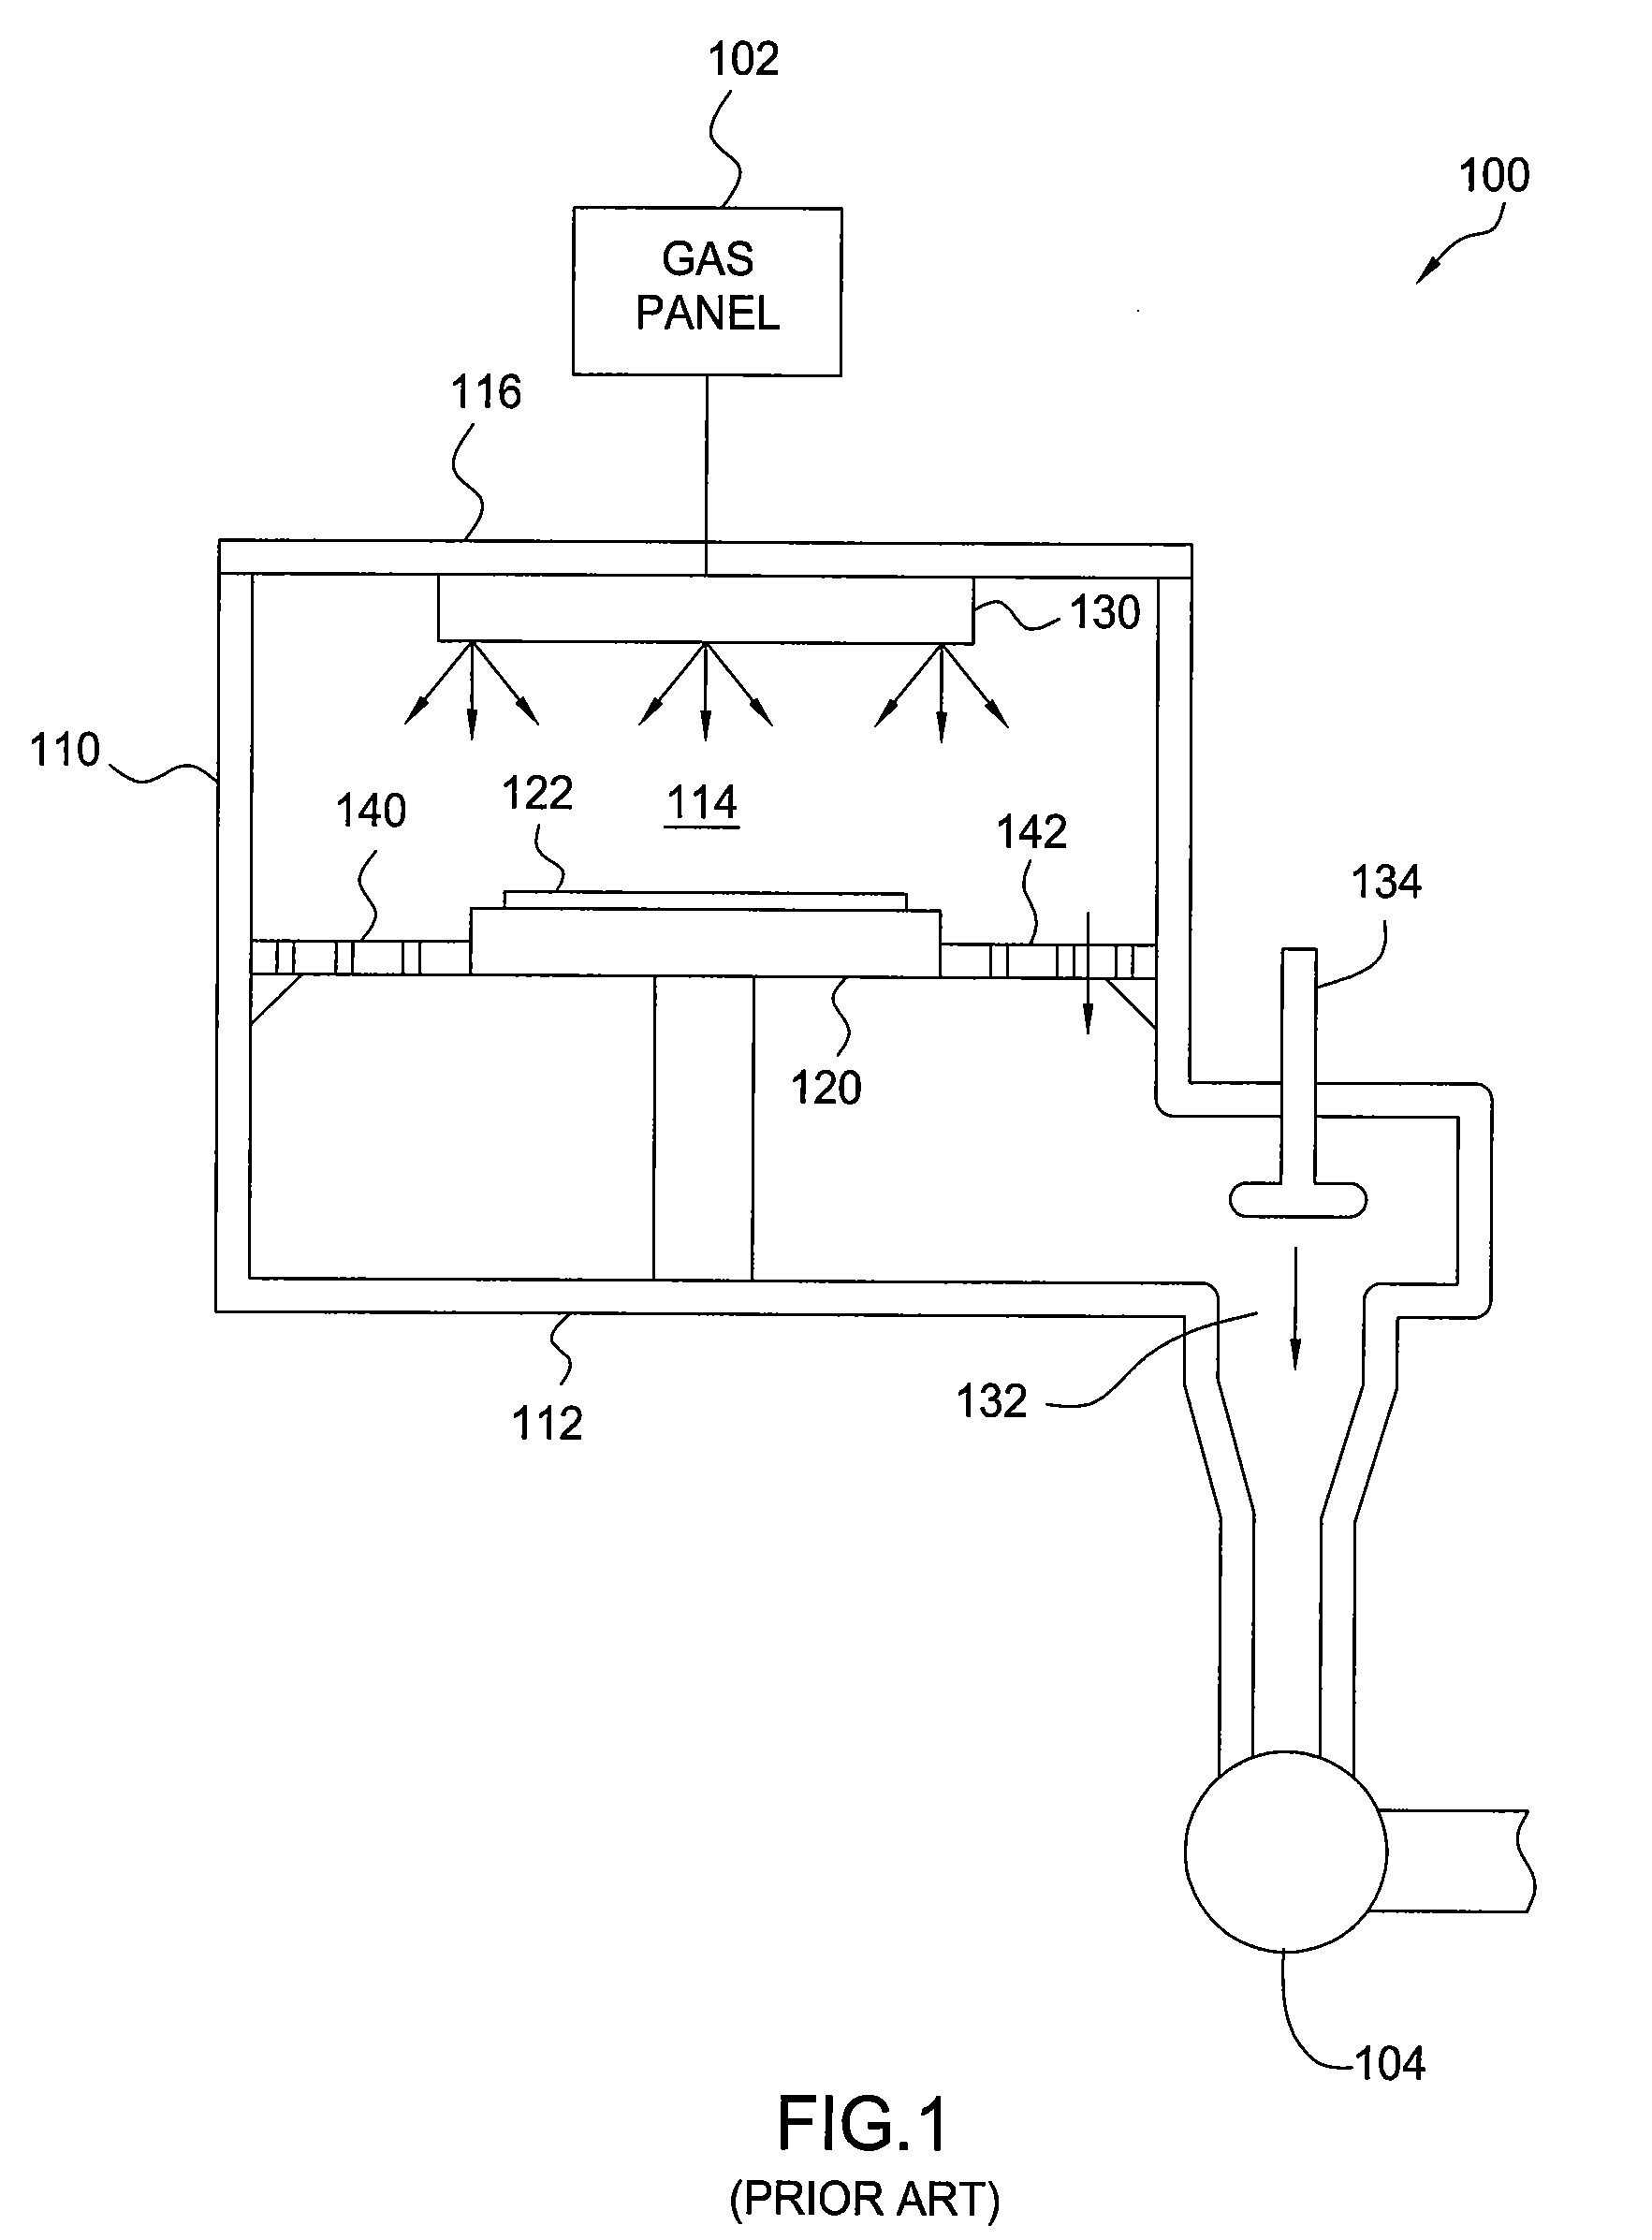 Gas flow equalizer plate suitable for use in a substrate process chamber